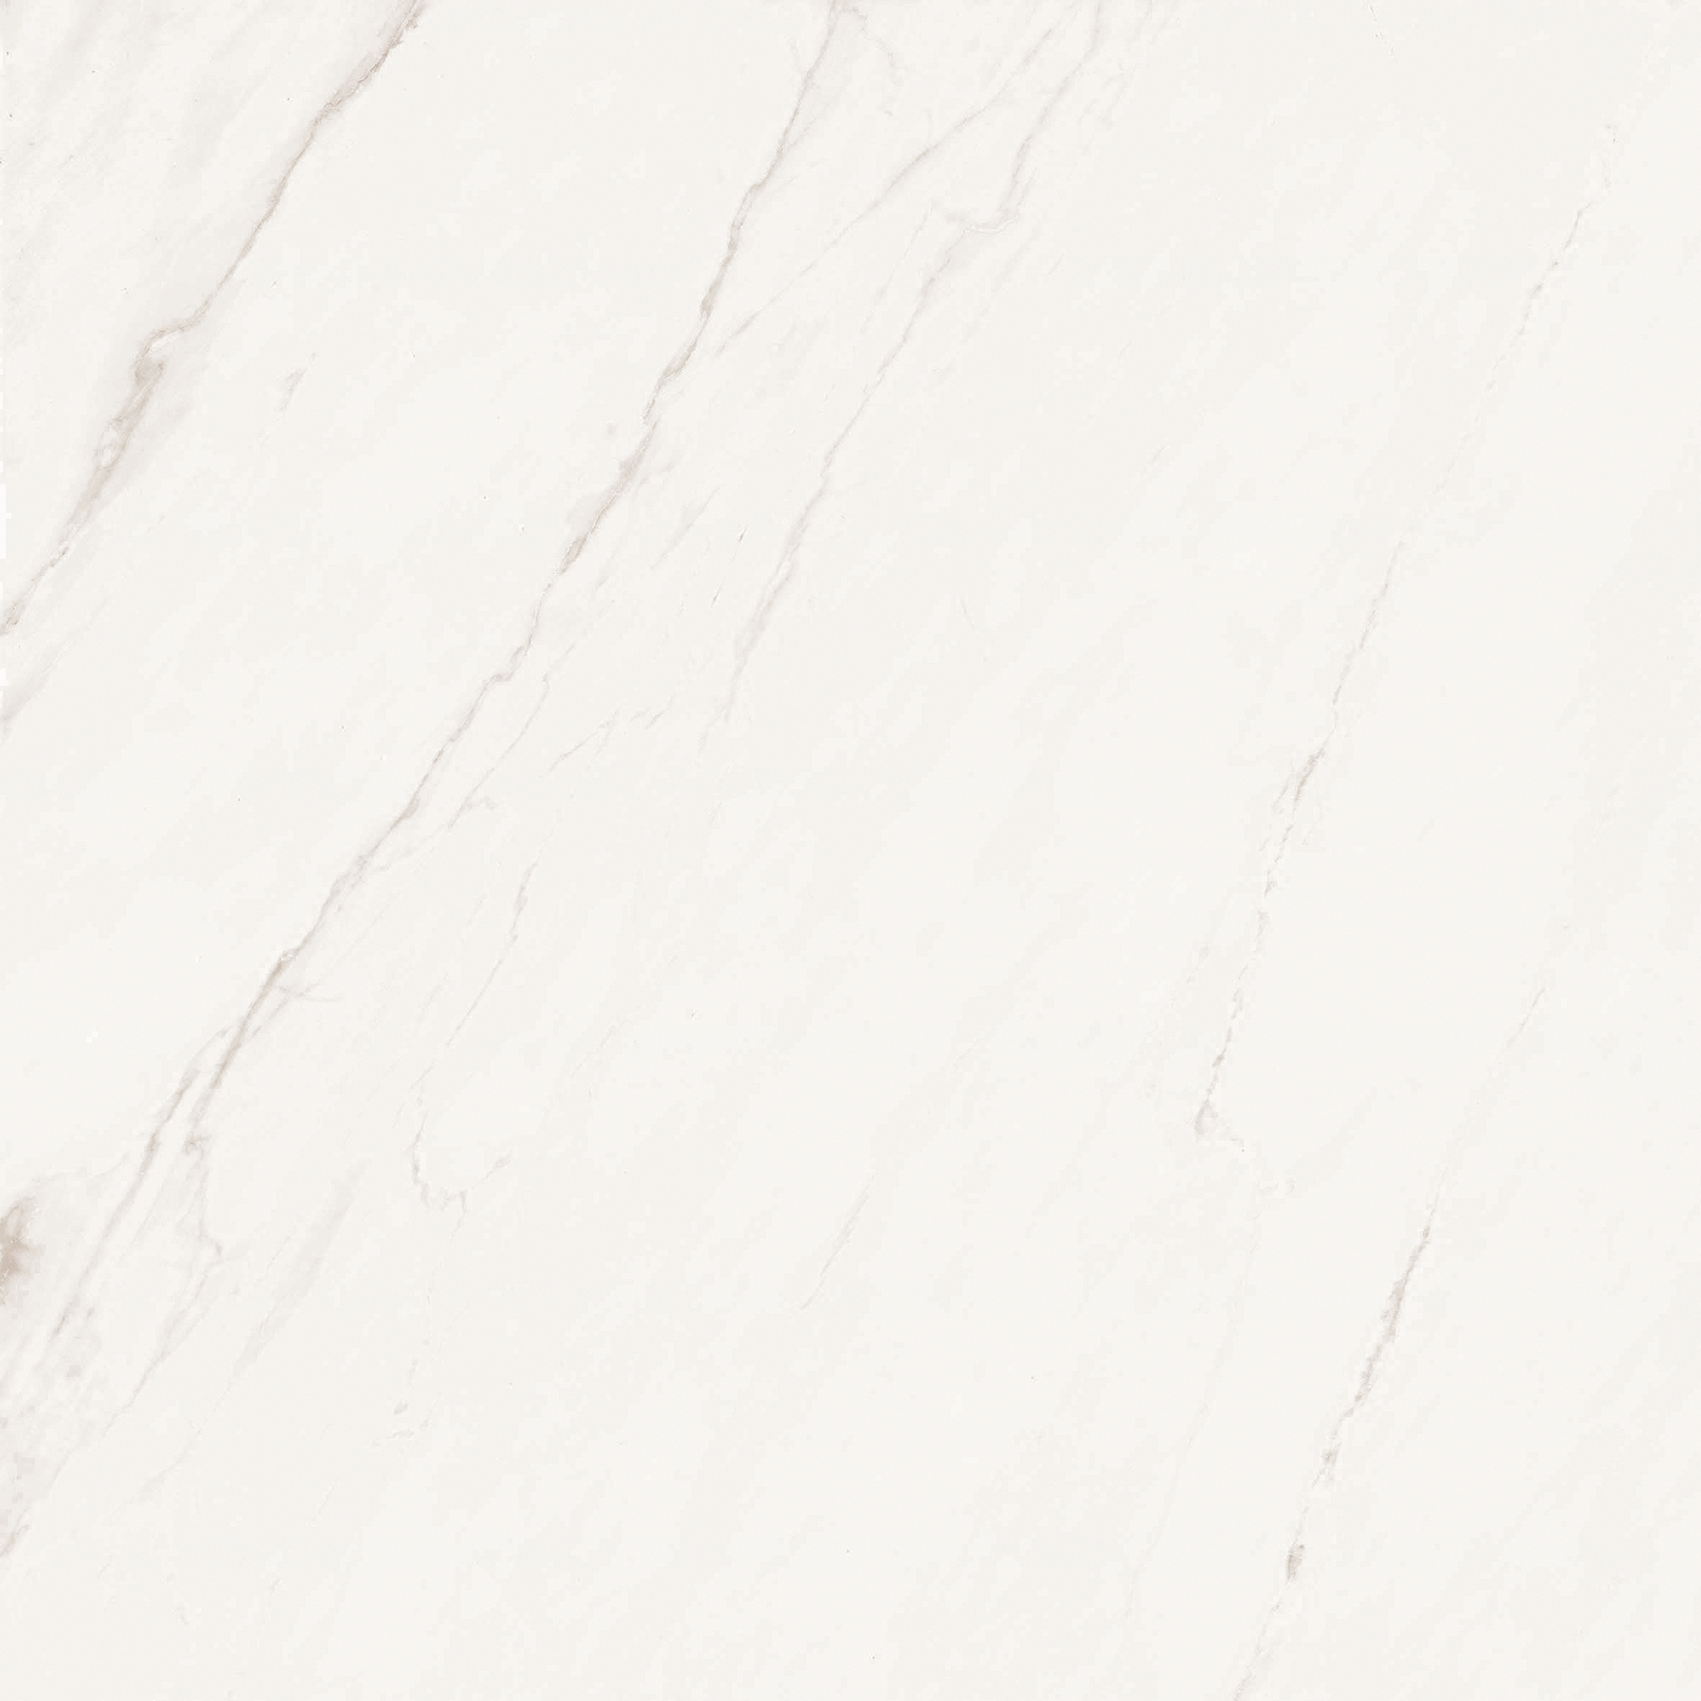 Lovetiles Marble White Polished B6150051001K polished 60x60cm rectified 9mm